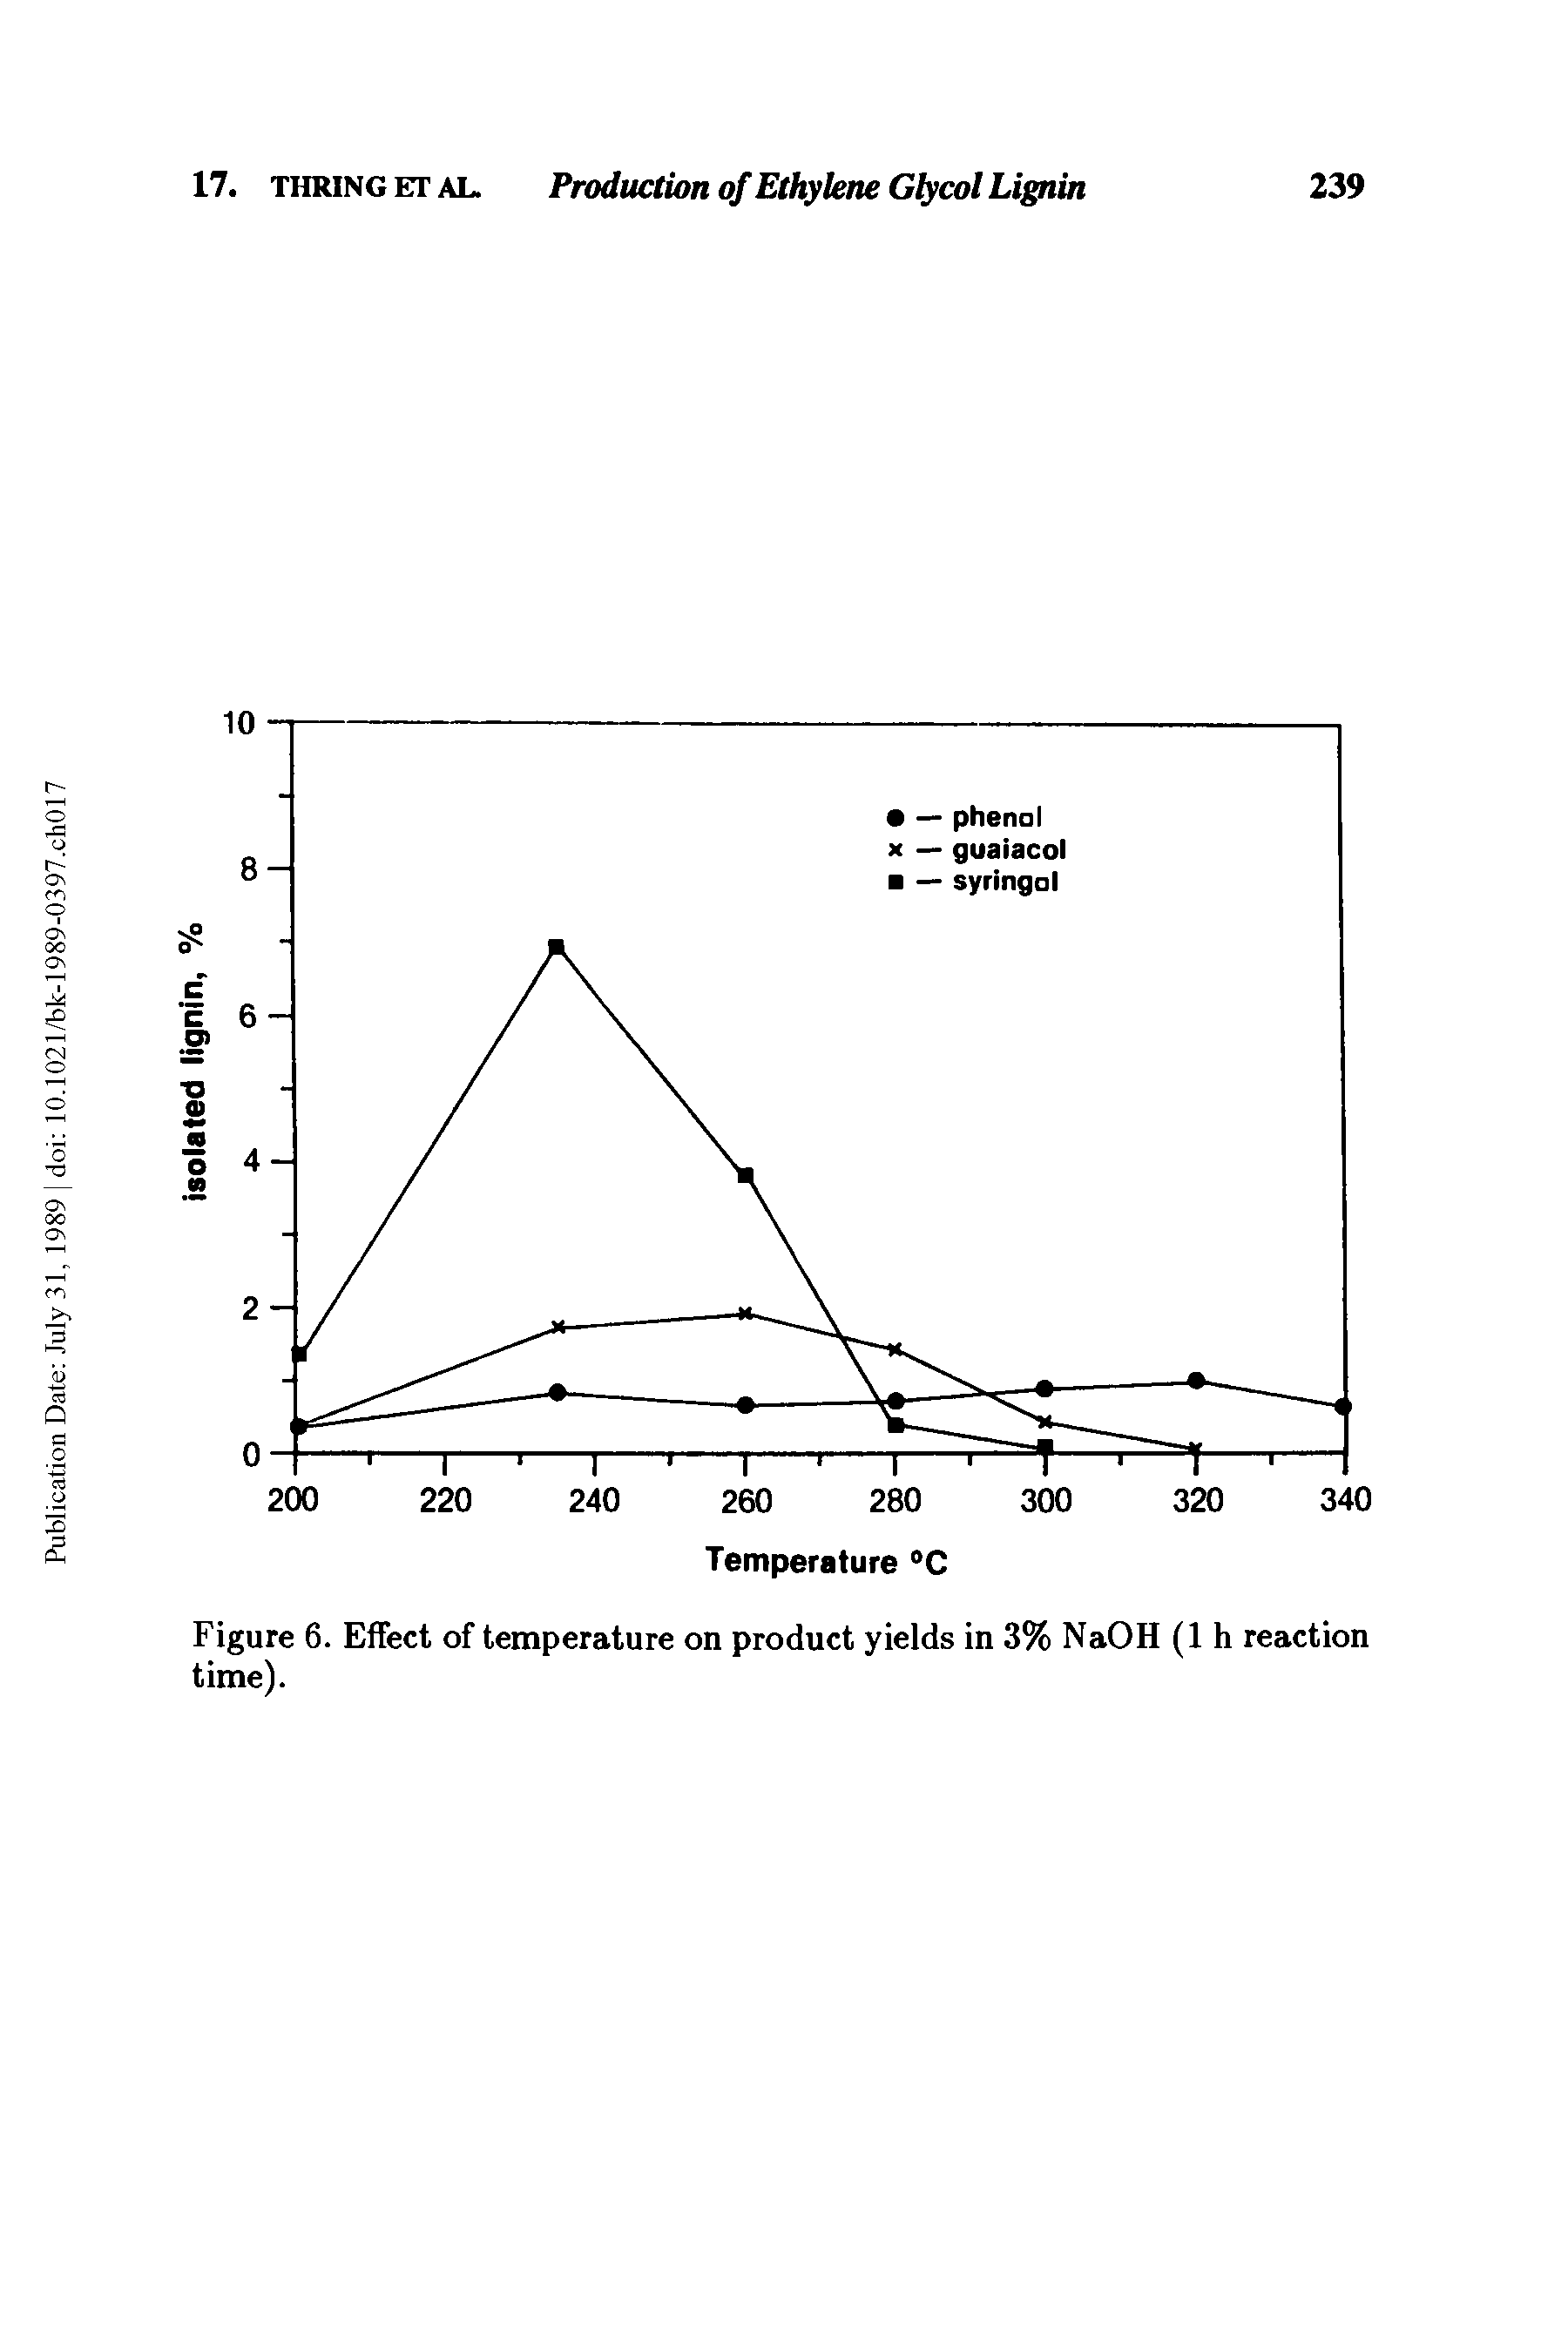 Figure 6. Effect of temperature on product yields in 3% NaOH (1 h reaction time).